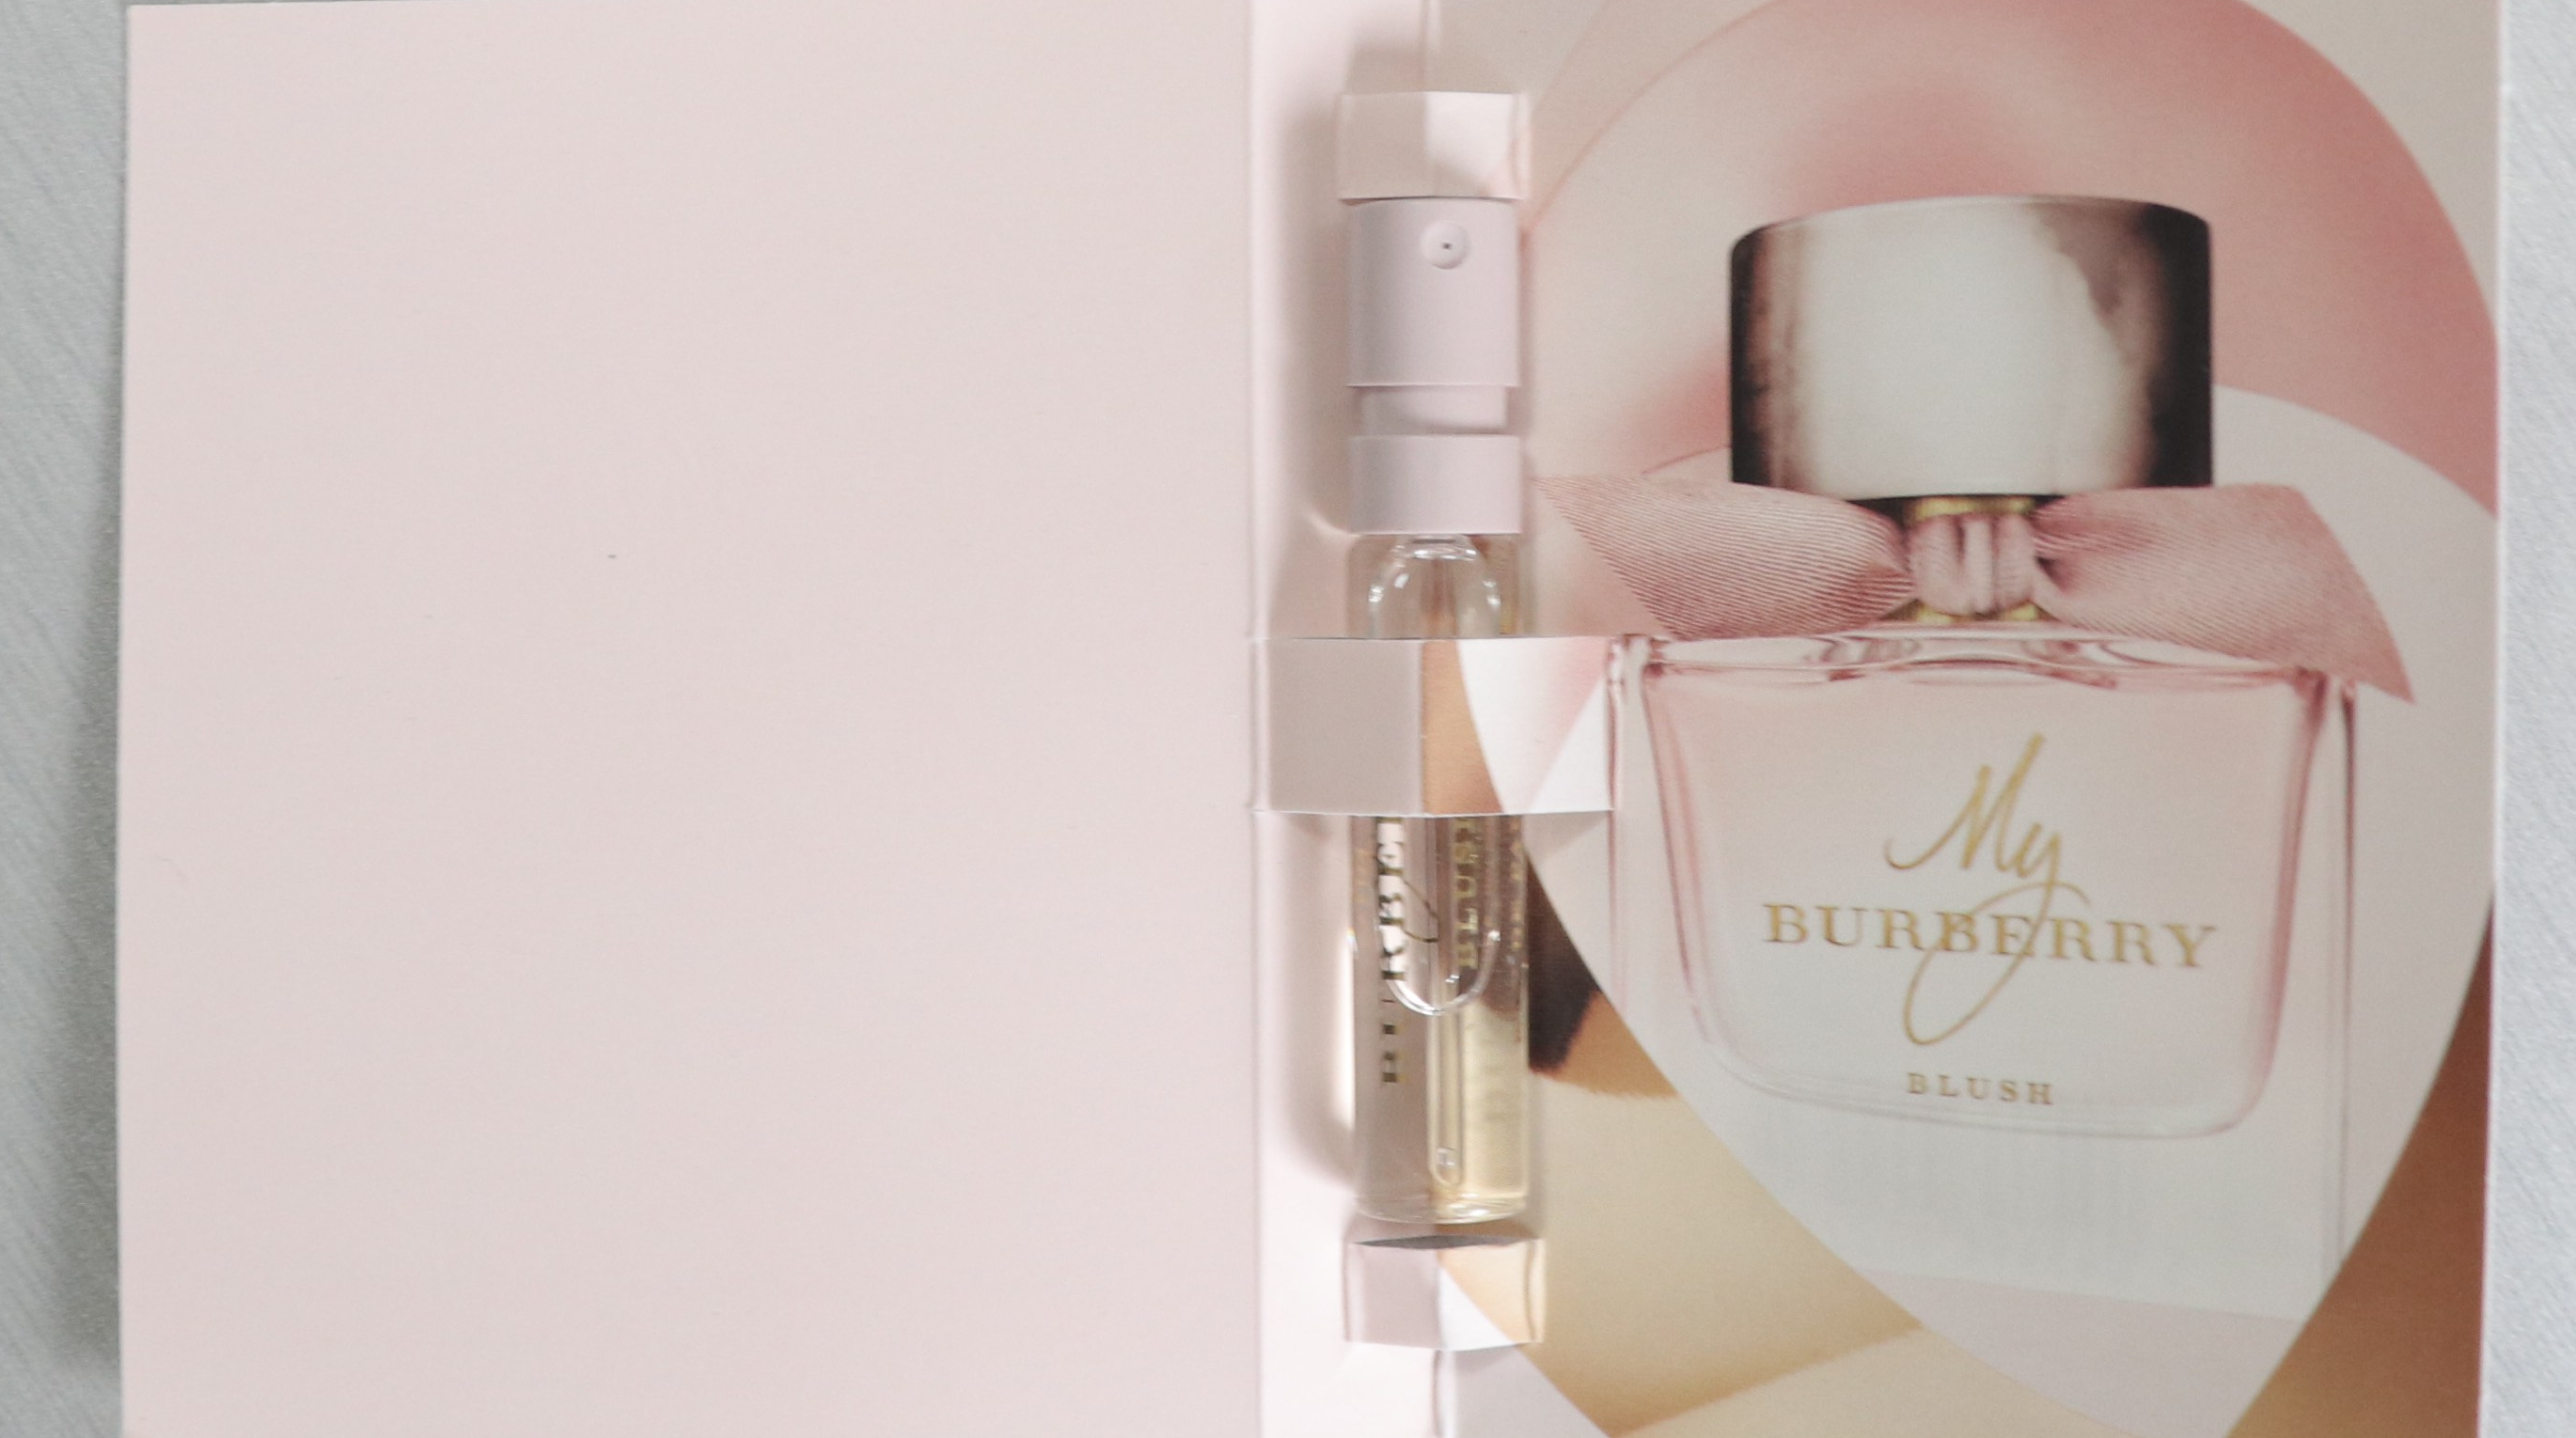 My Burberry Fragrance in the scent Blush